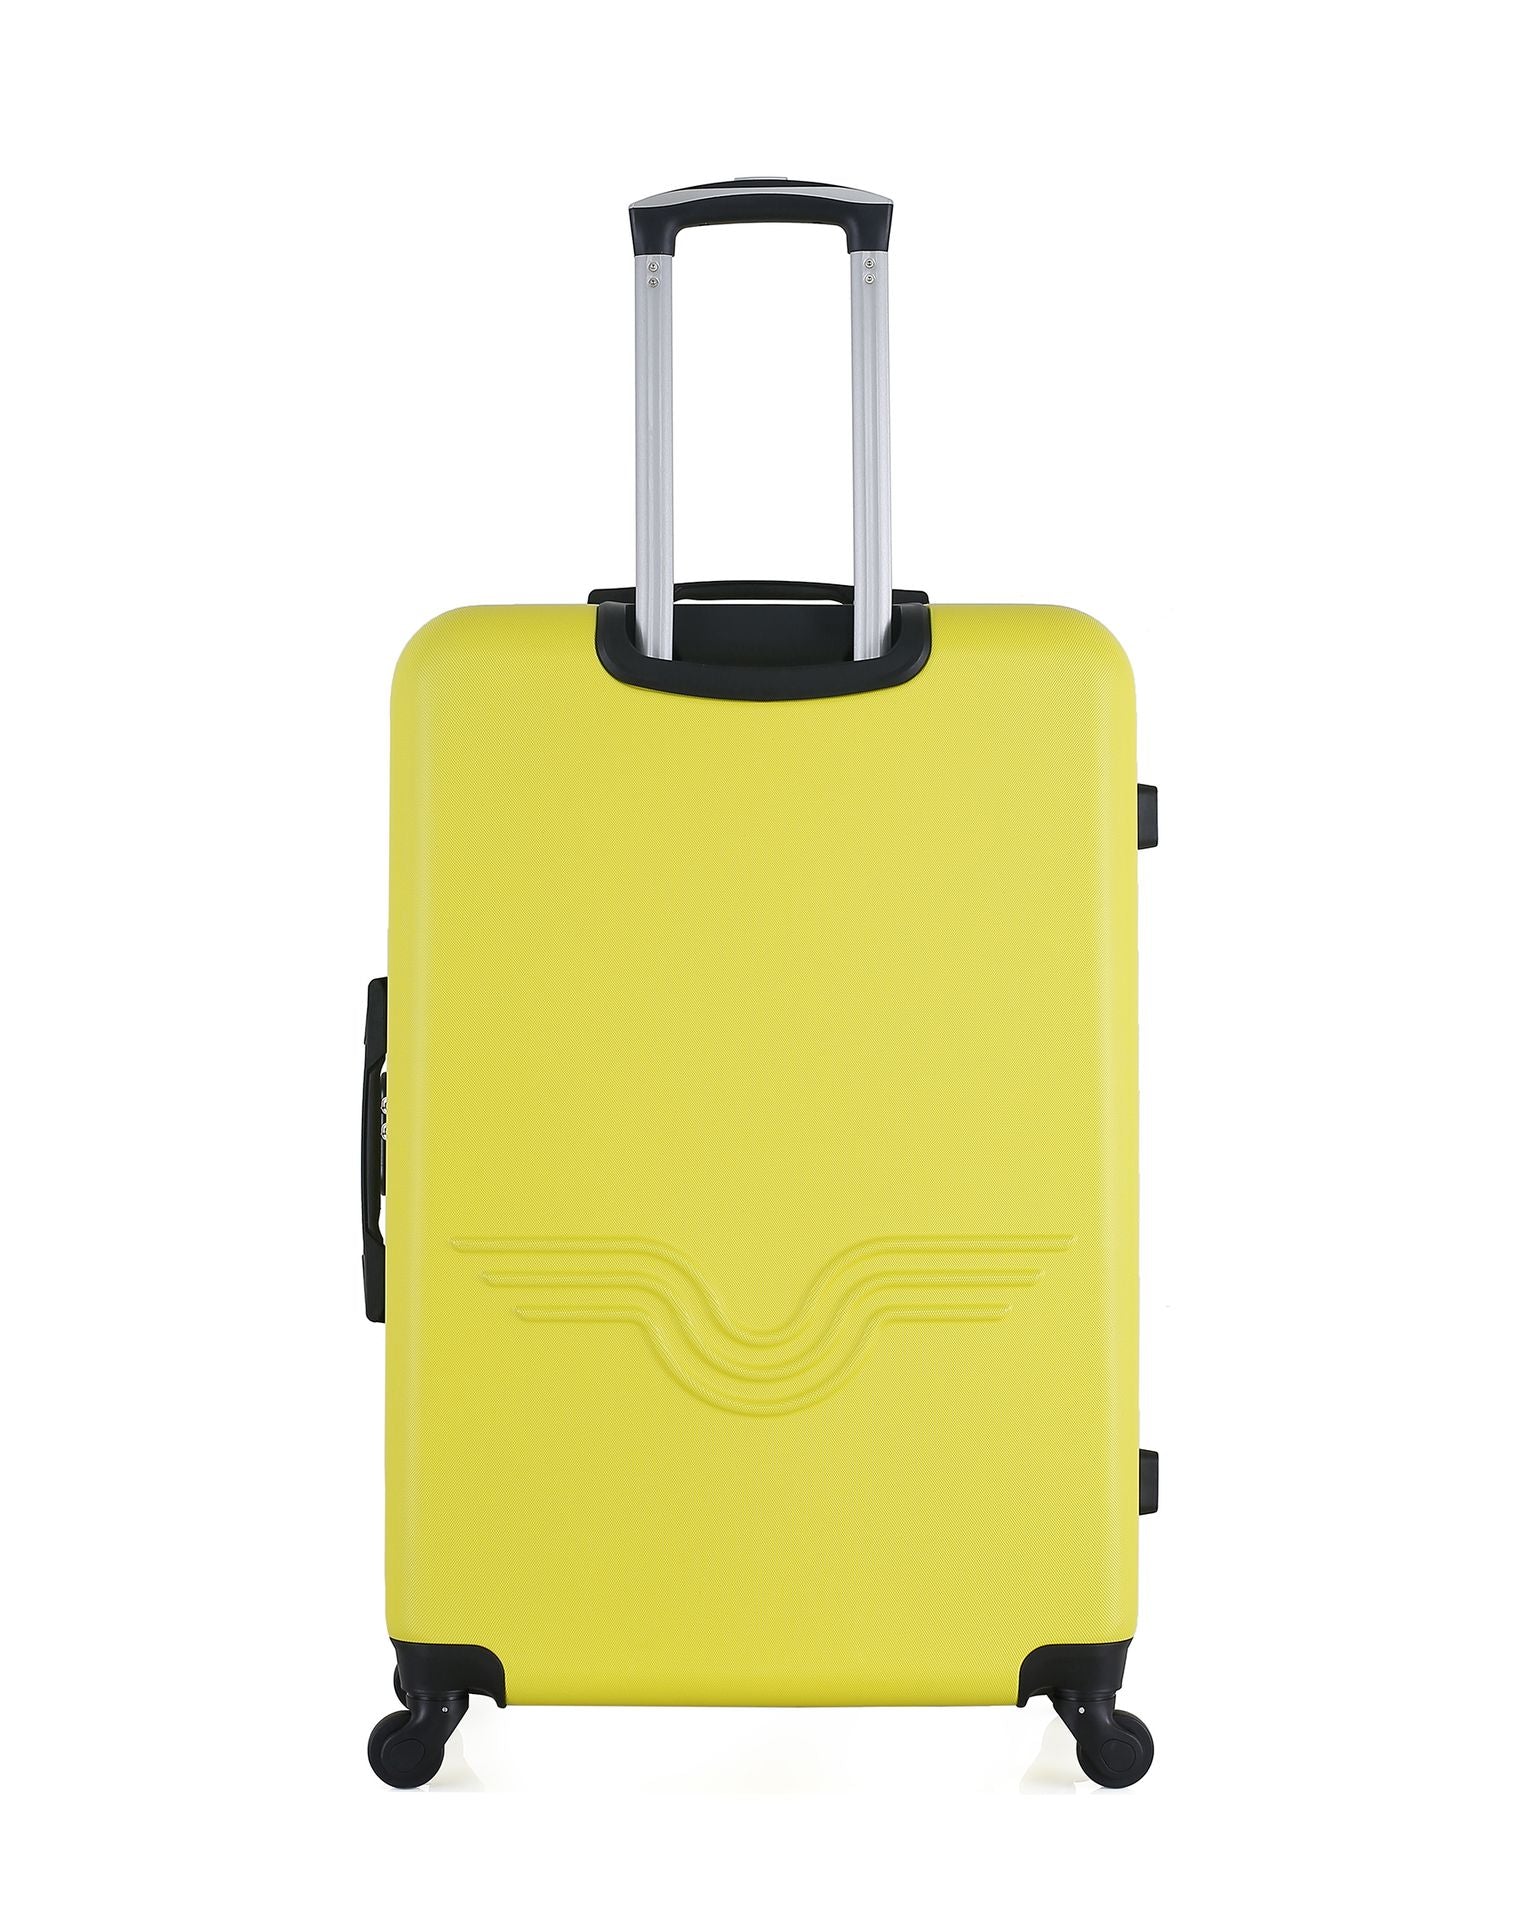 Valise Grand Format ABS QUEENS 4 Roues 75 cm